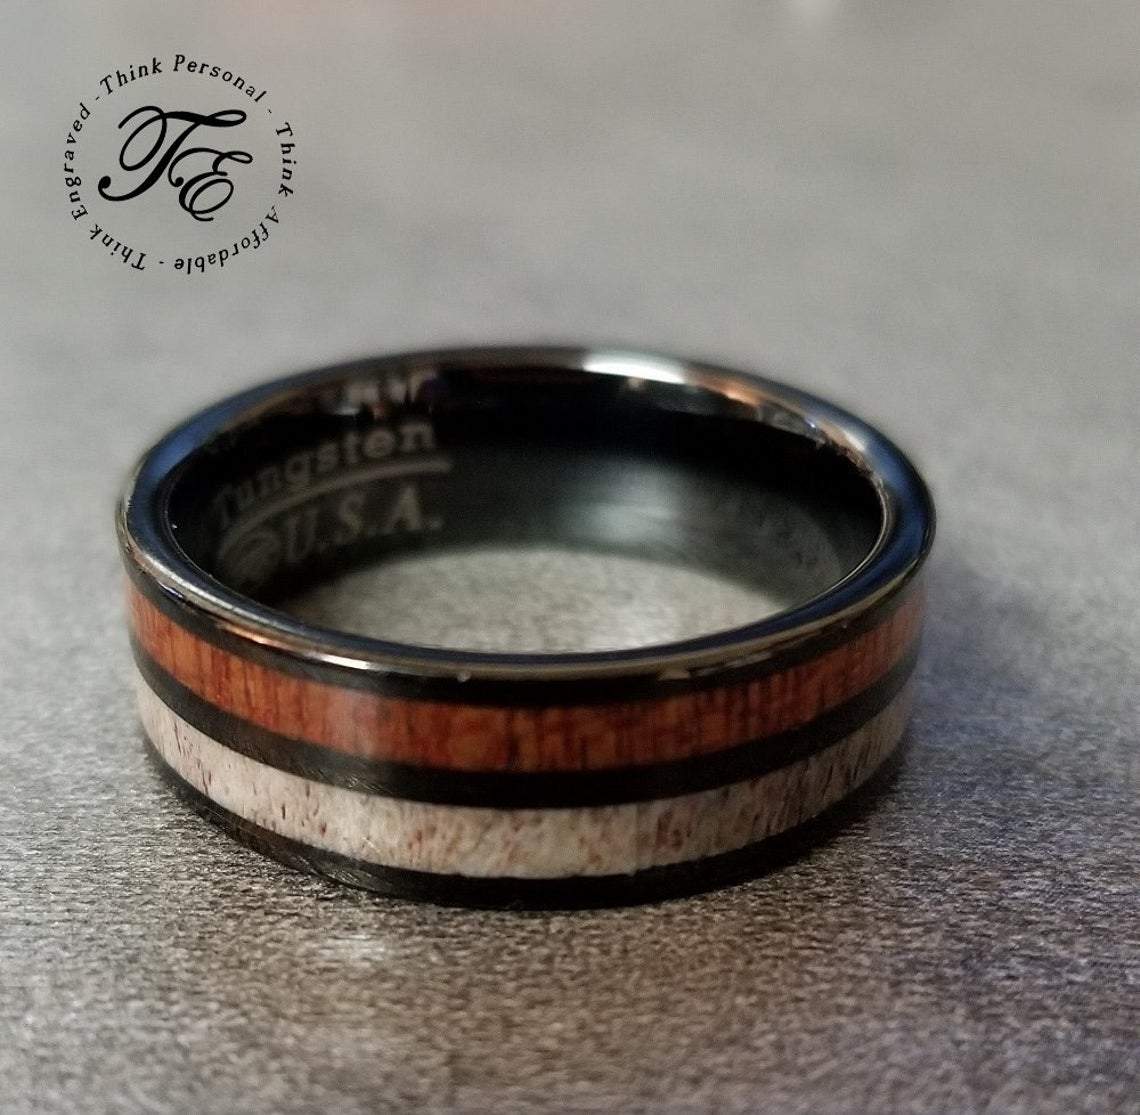 ThinkEngraved wedding Band Personalized Men's Tungsten Wedding Band - Wood and Deer Antler Inlays